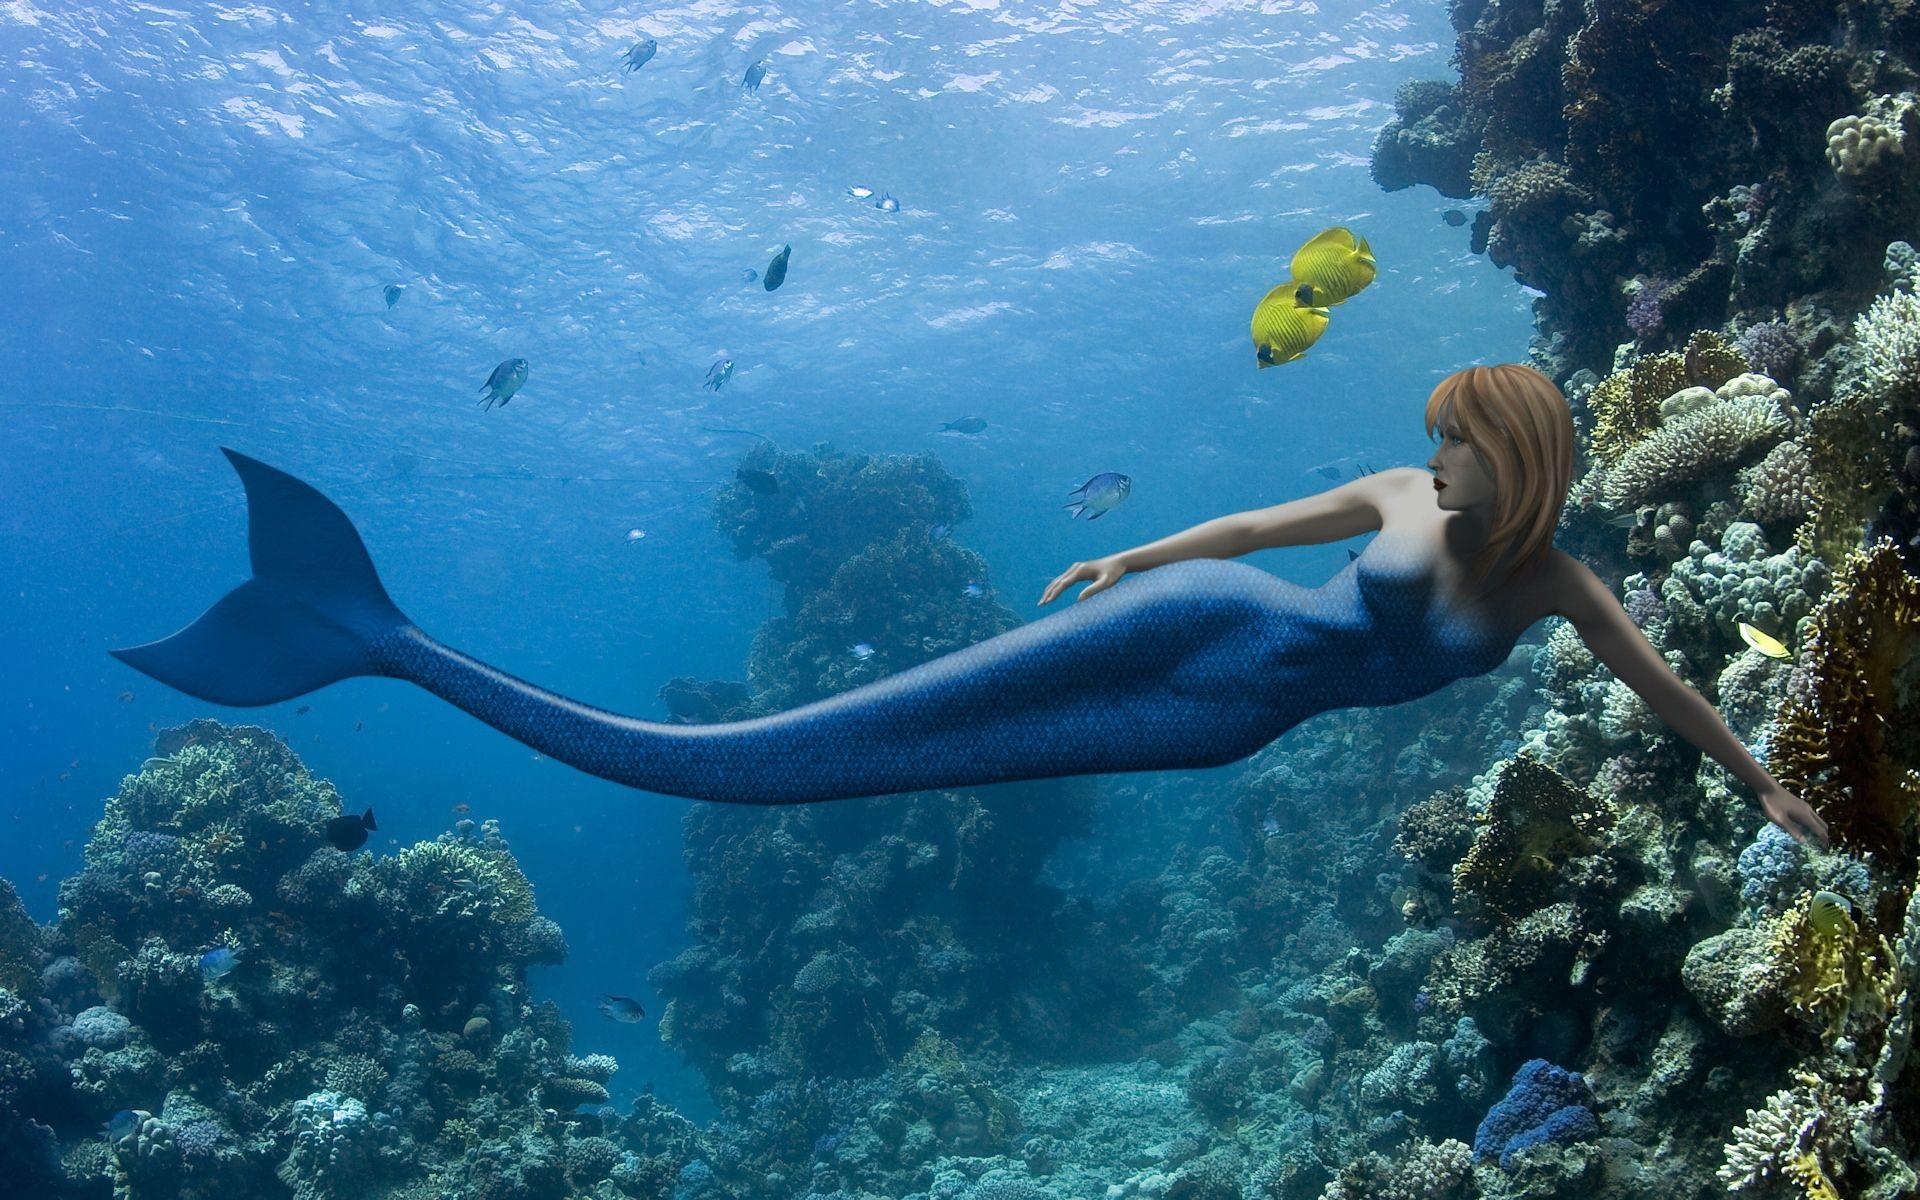 Mermaid Image, High Definition, High Quality, Widescreen